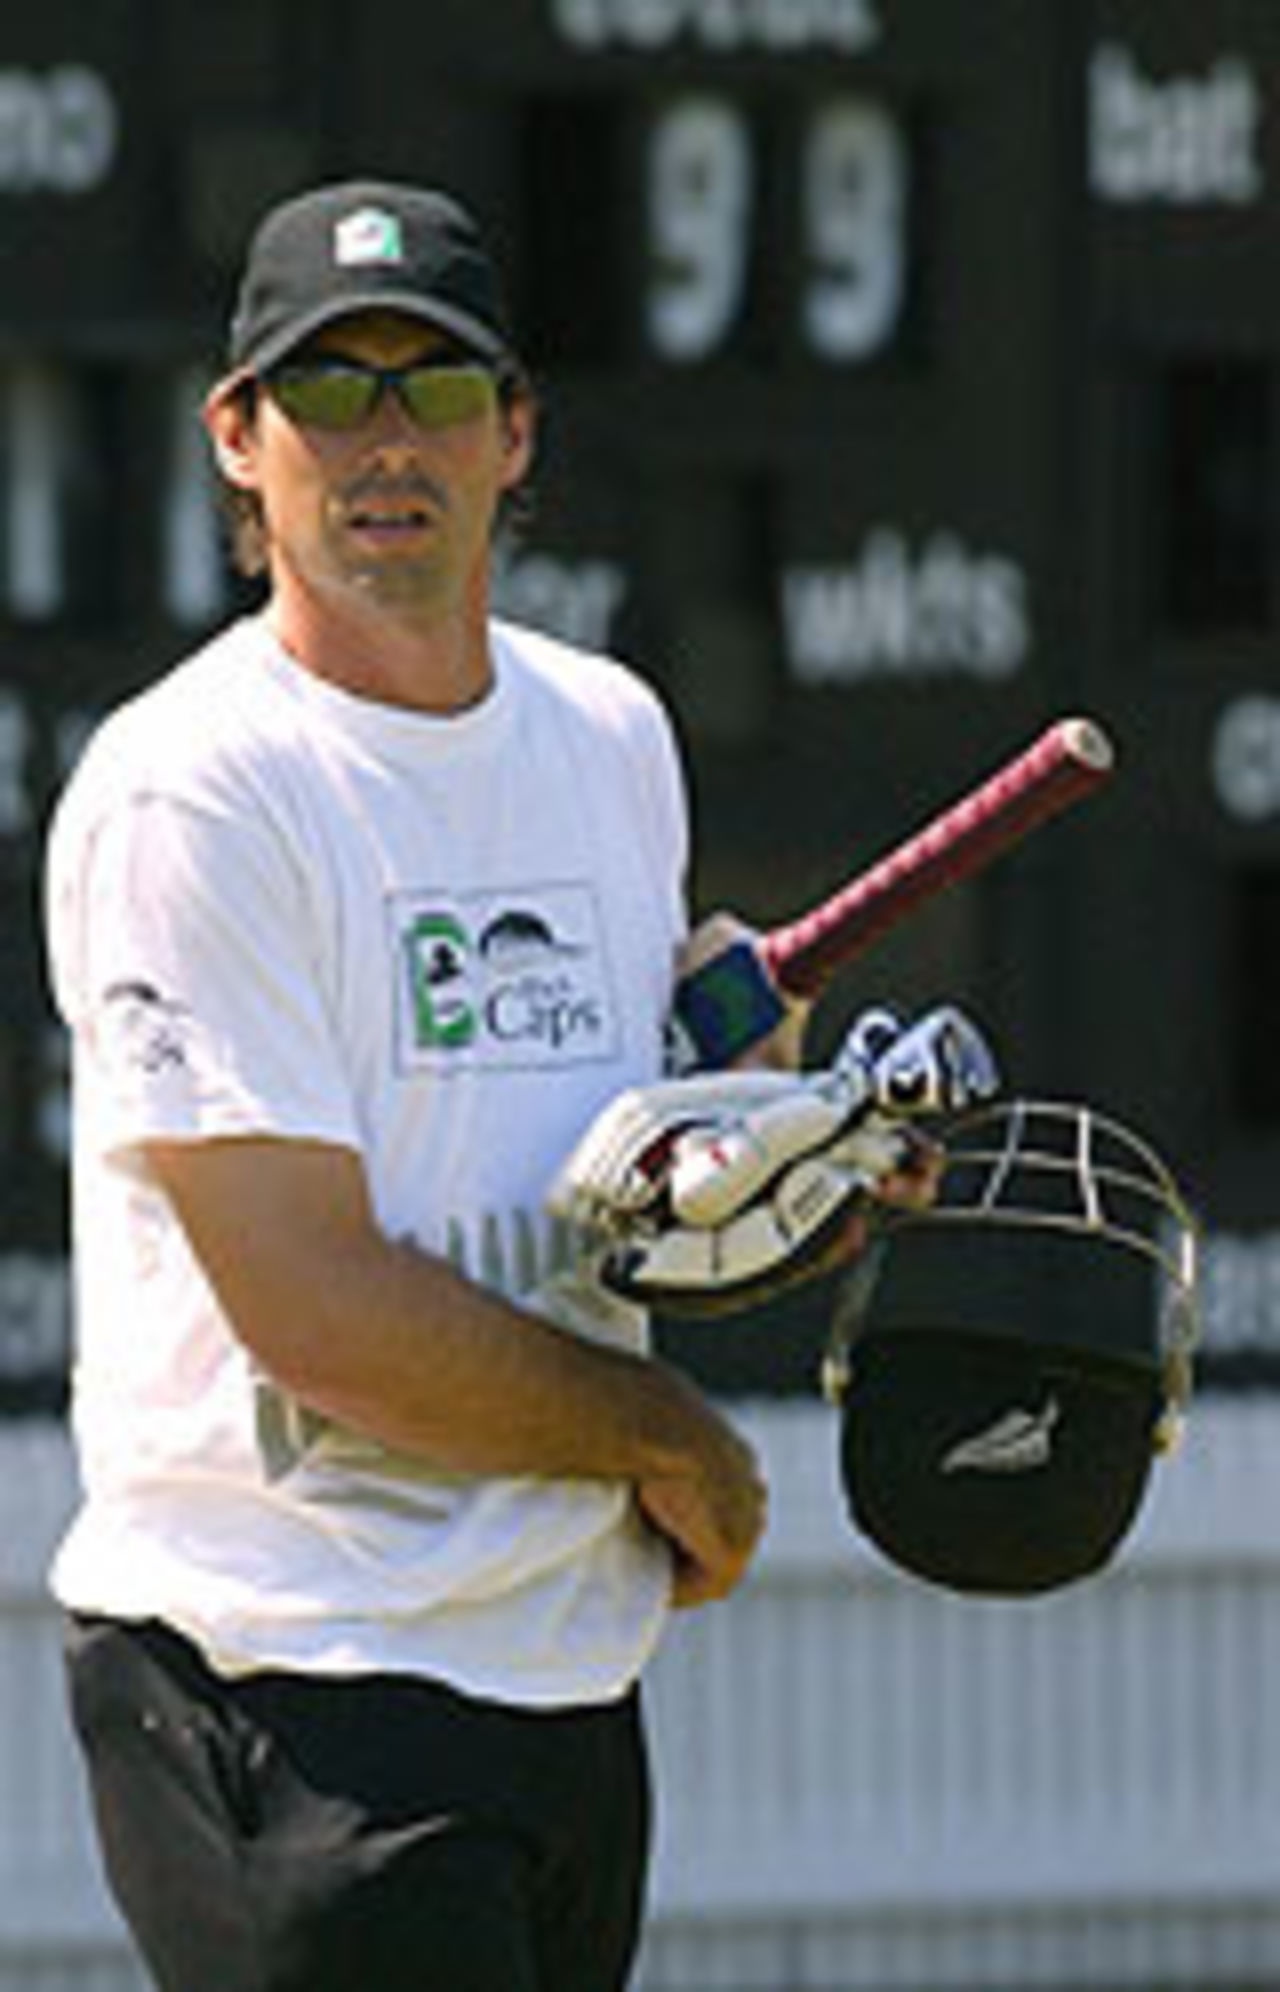 Stephen Fleming on his way back from nets